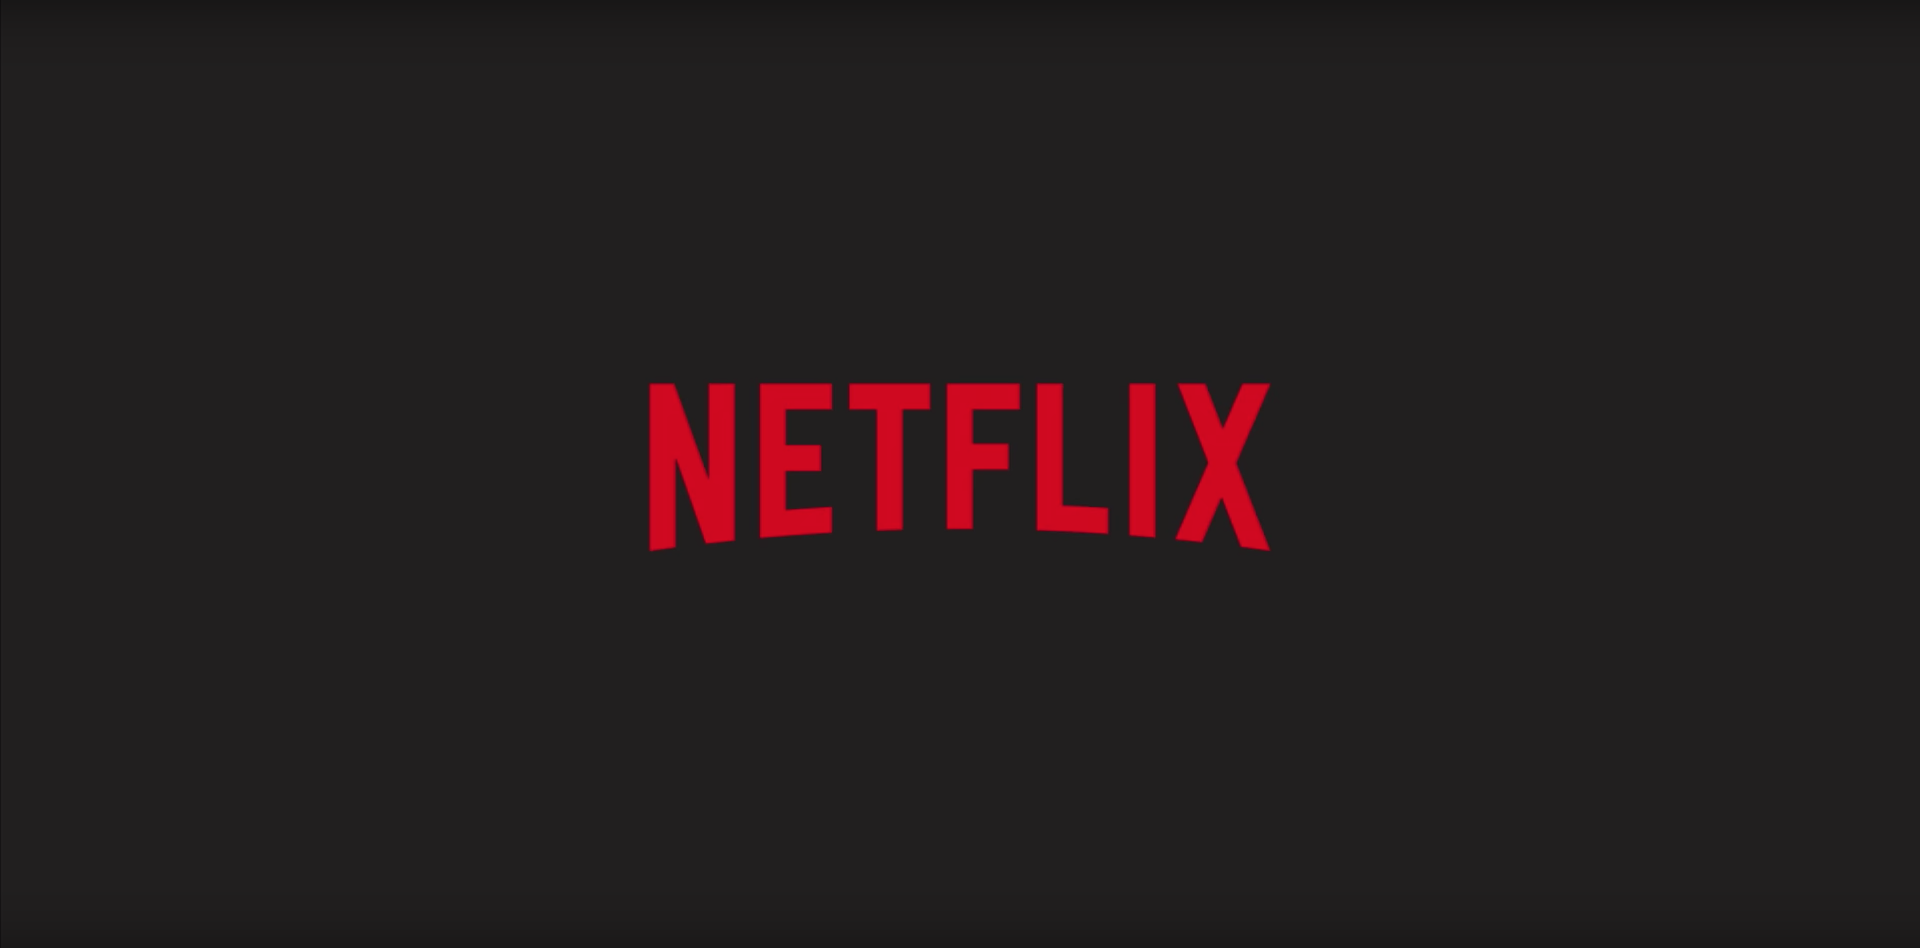 the top 5 movies to watch on Netflix in the month of February